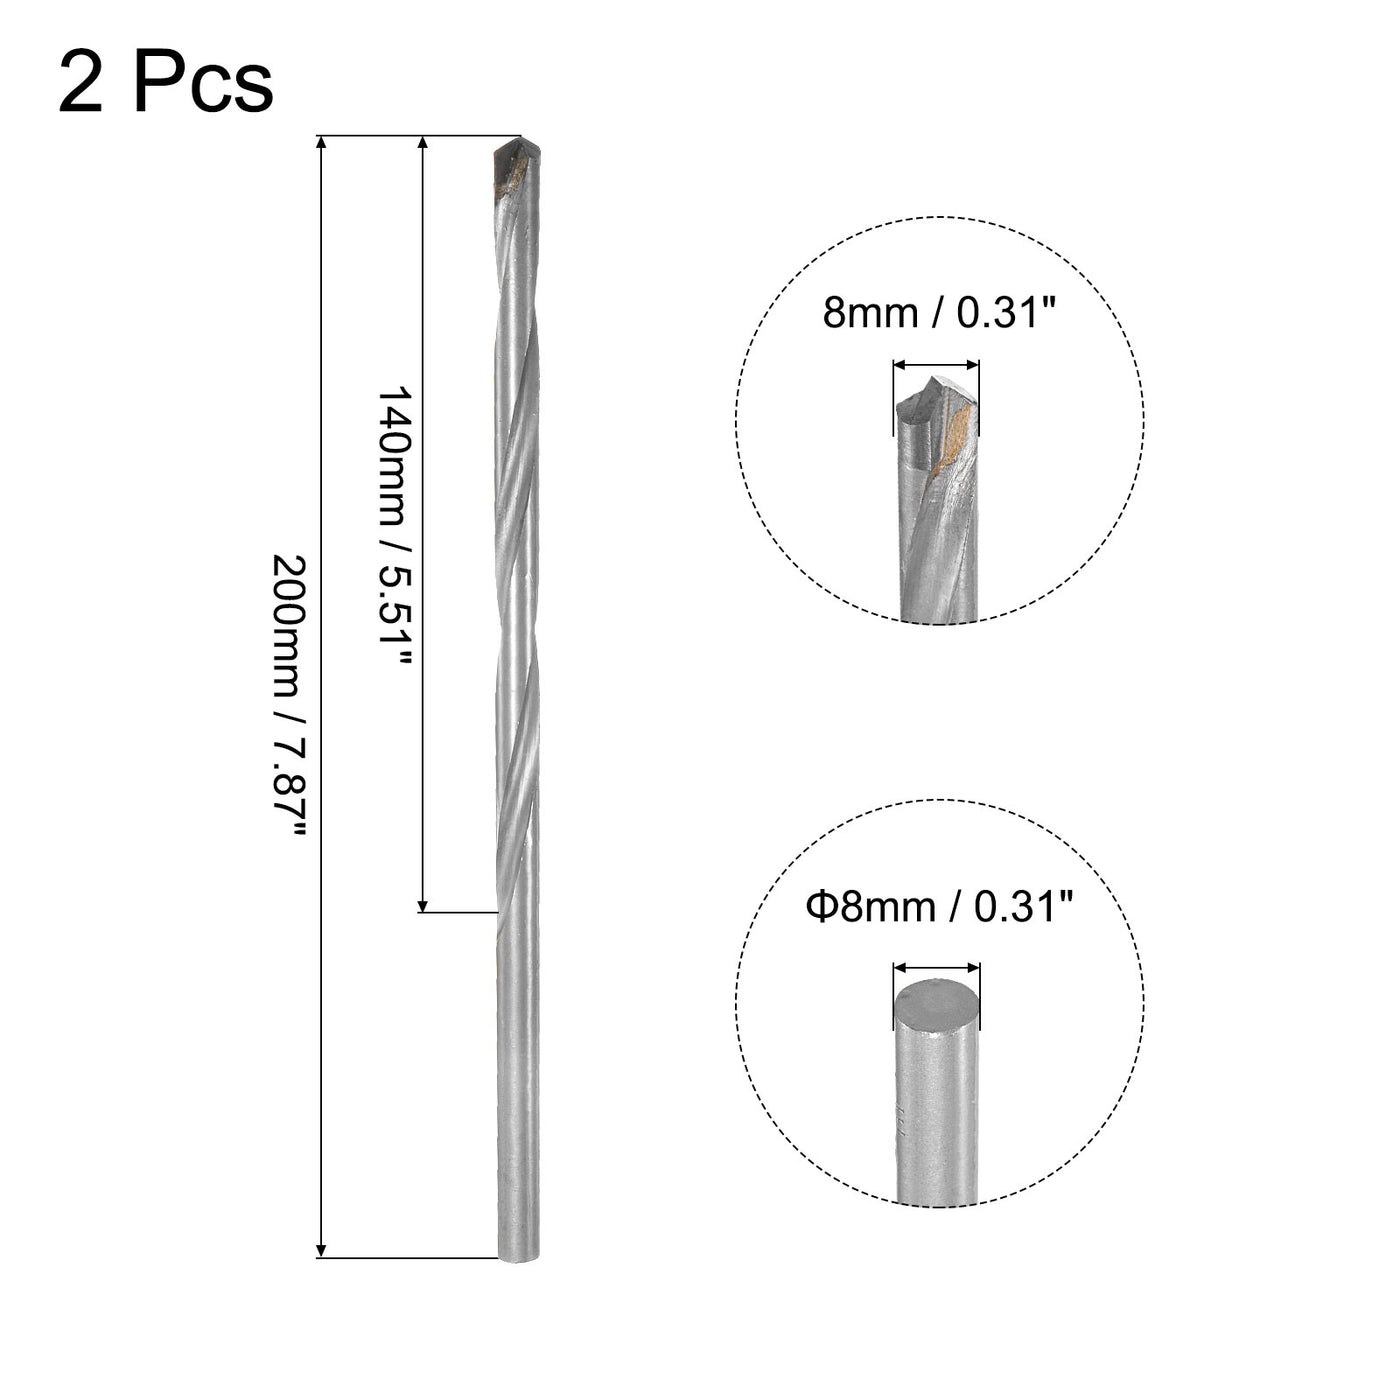 uxcell Uxcell 8mm Cutting Dia Round Shank Cemented Carbide Twist Drill Bit, 200mm Length 2 Pcs